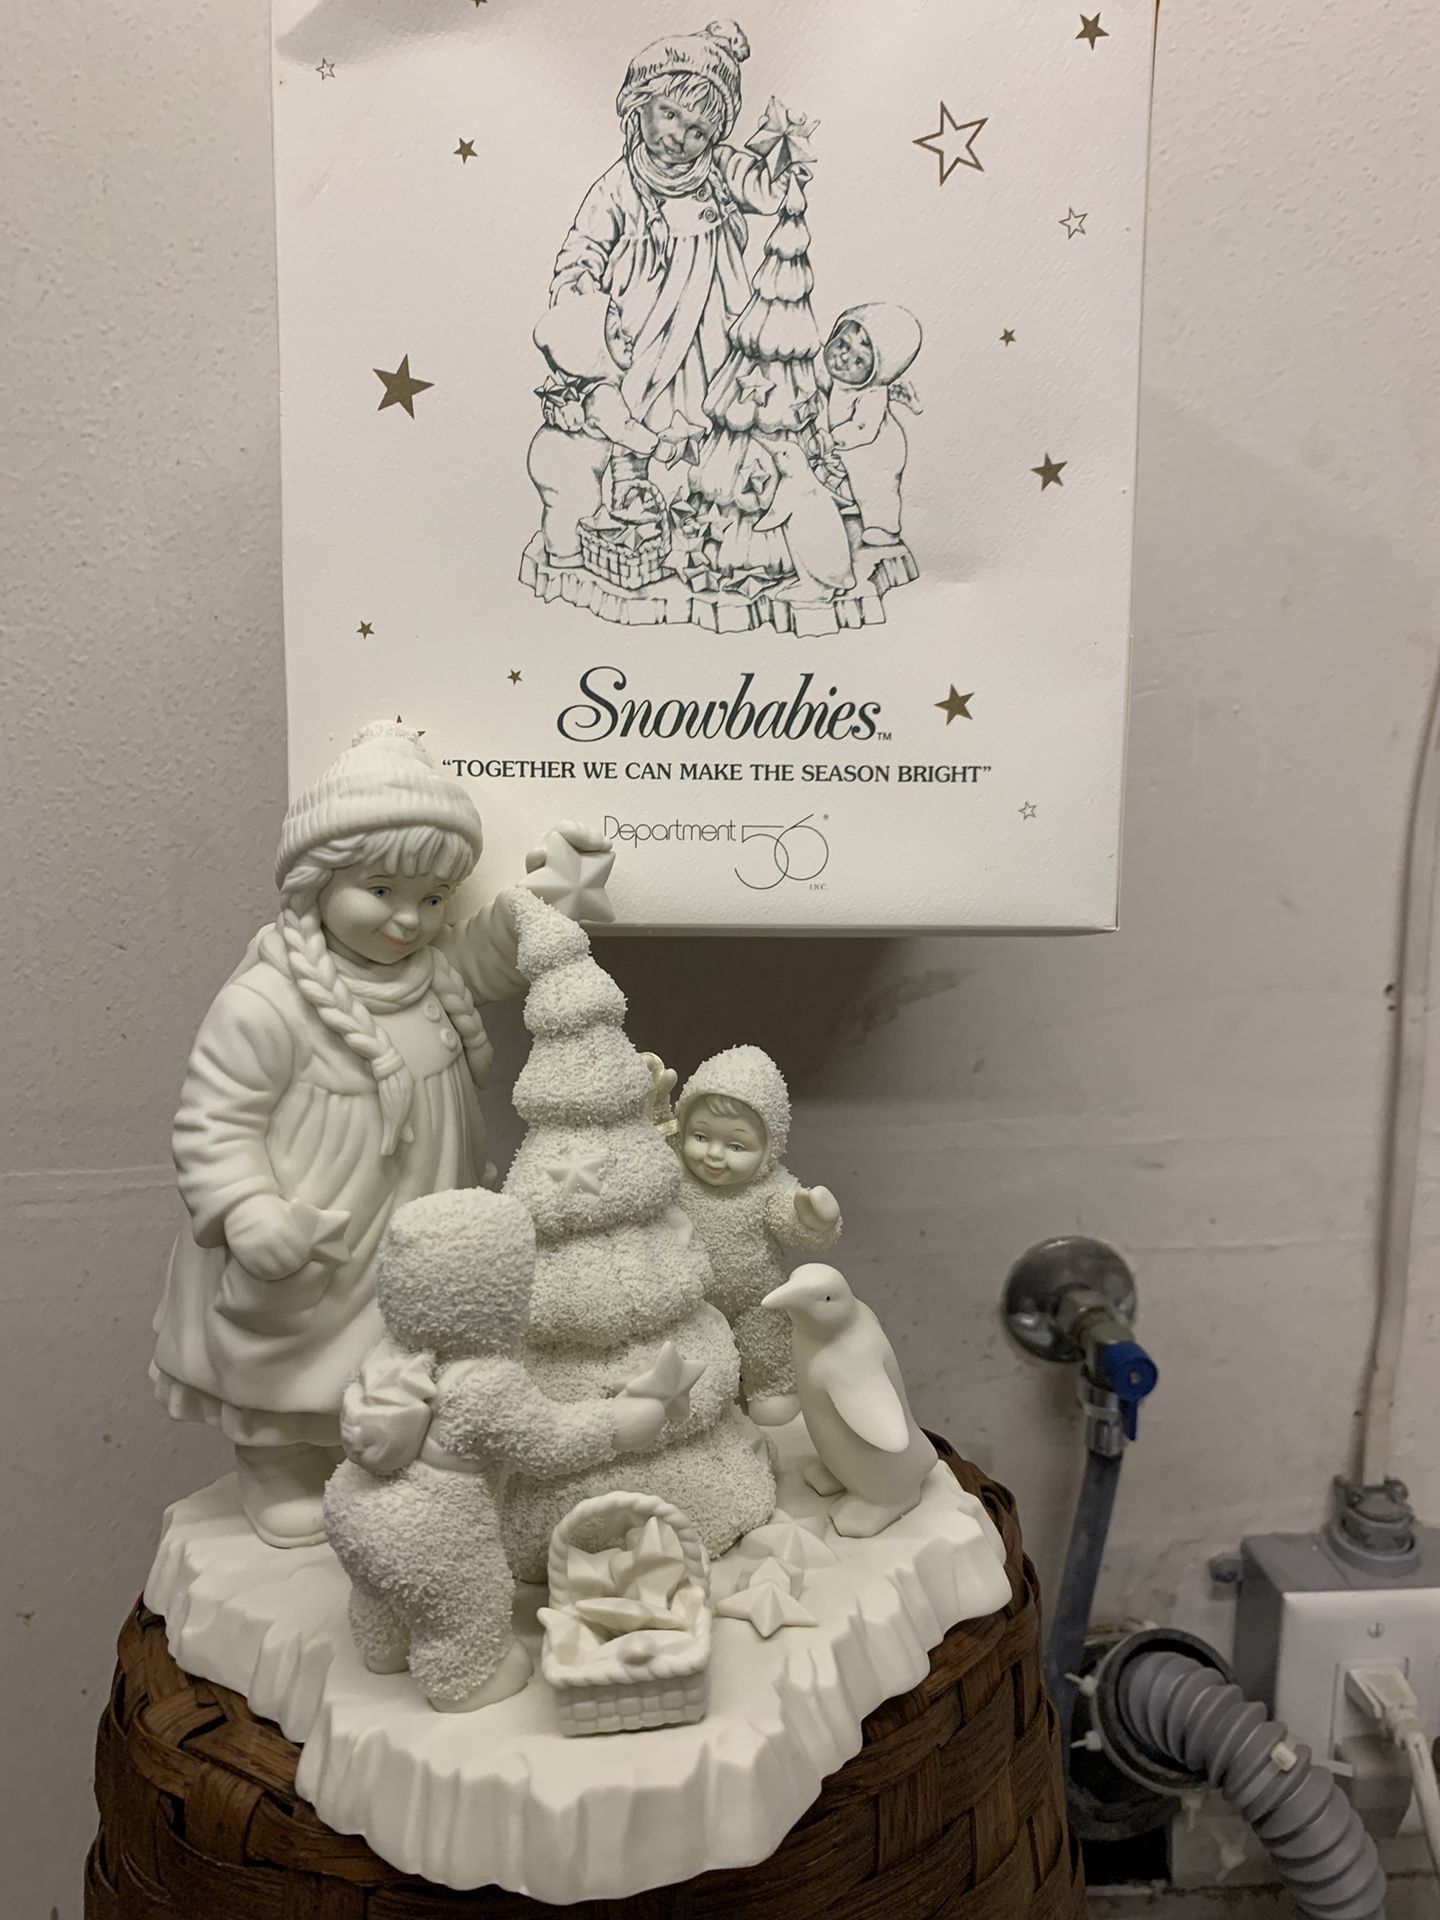 Snowbabies “Together We Can Make The Season Bright” Nineteen Ninety Eight